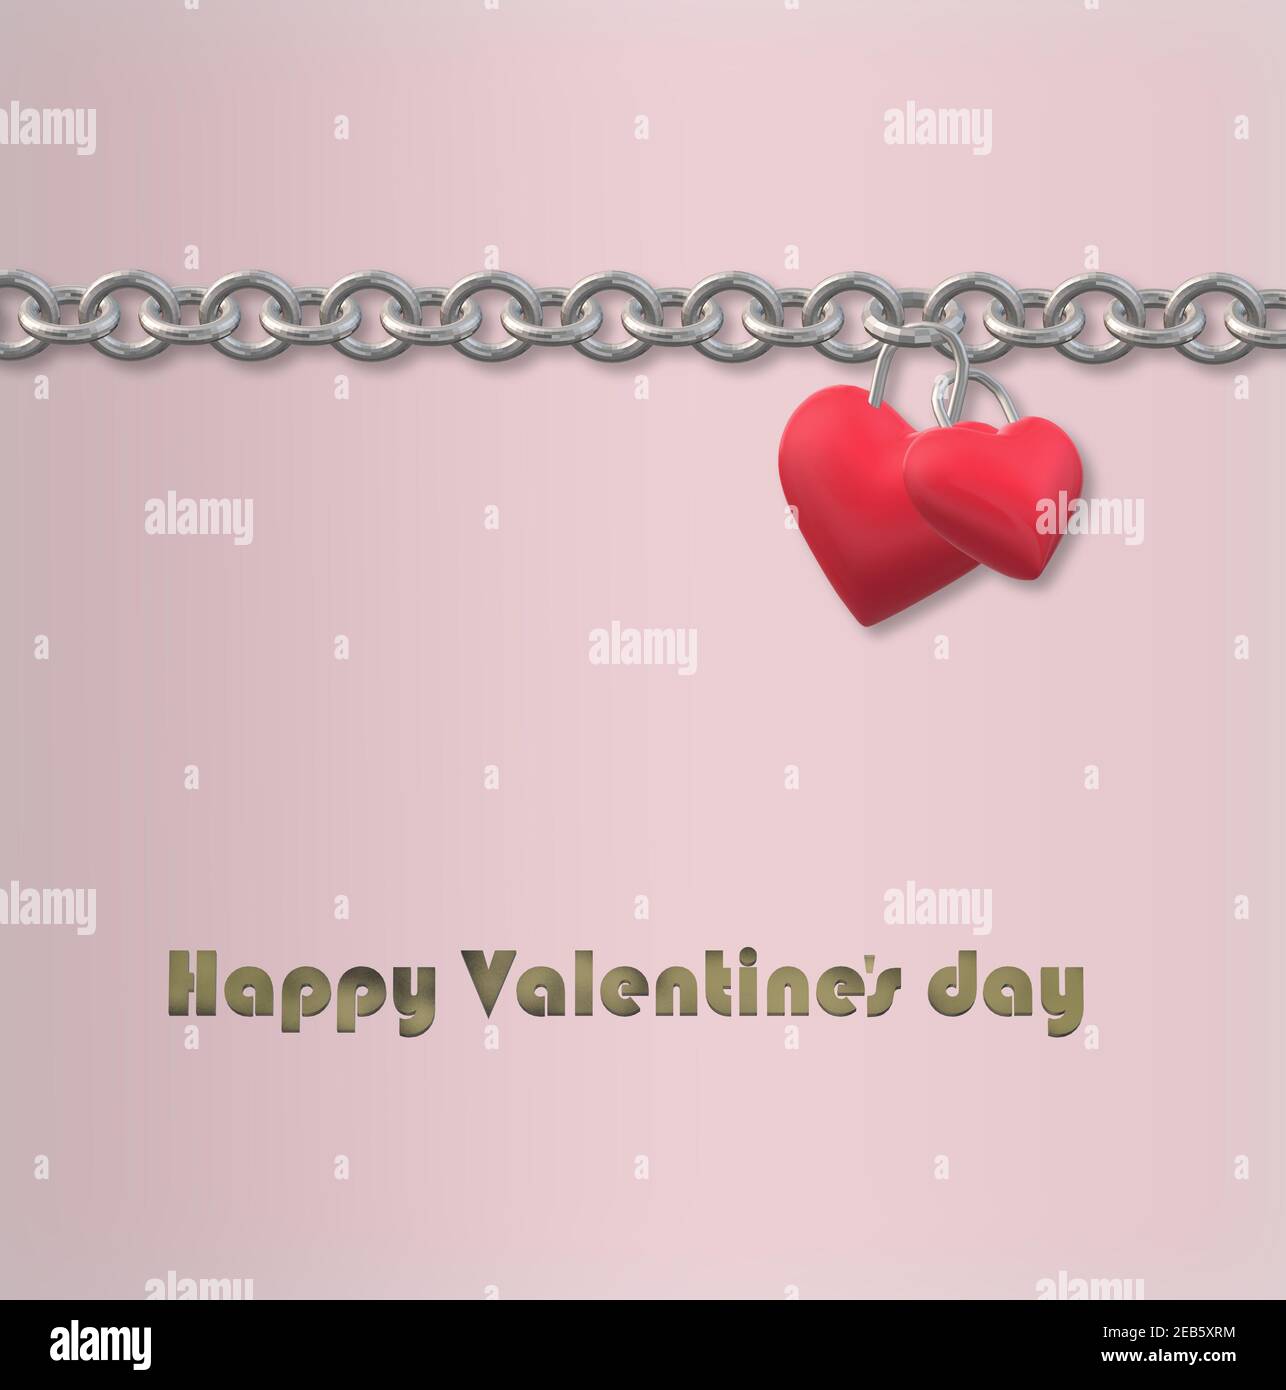 Two linked hearts hanging on chain on pink background with text Happy Valentines day. Valentines card, love design, couple concept. 3D rendering Stock Photo